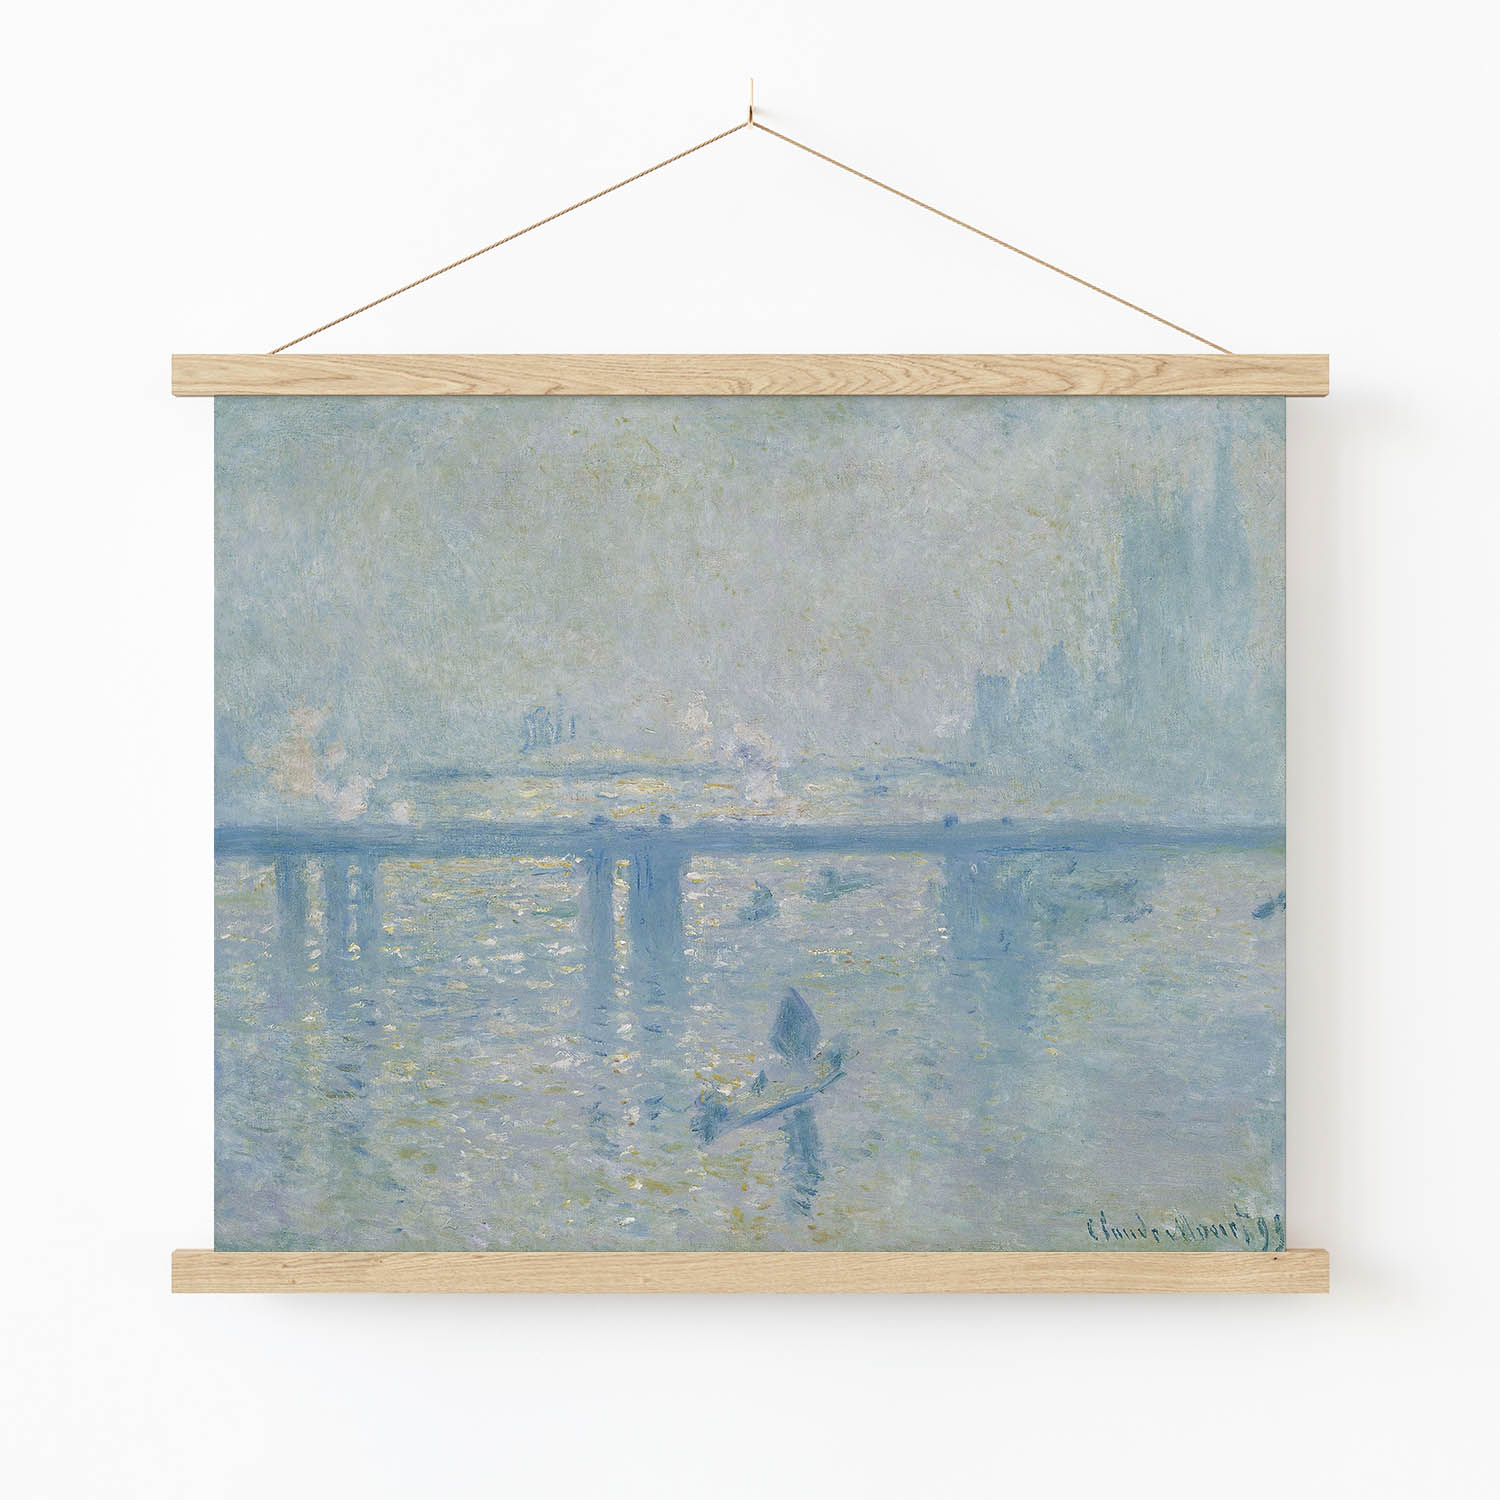 Relaxing and Peaceful Art Print in Wood Hanger Frame on Wall